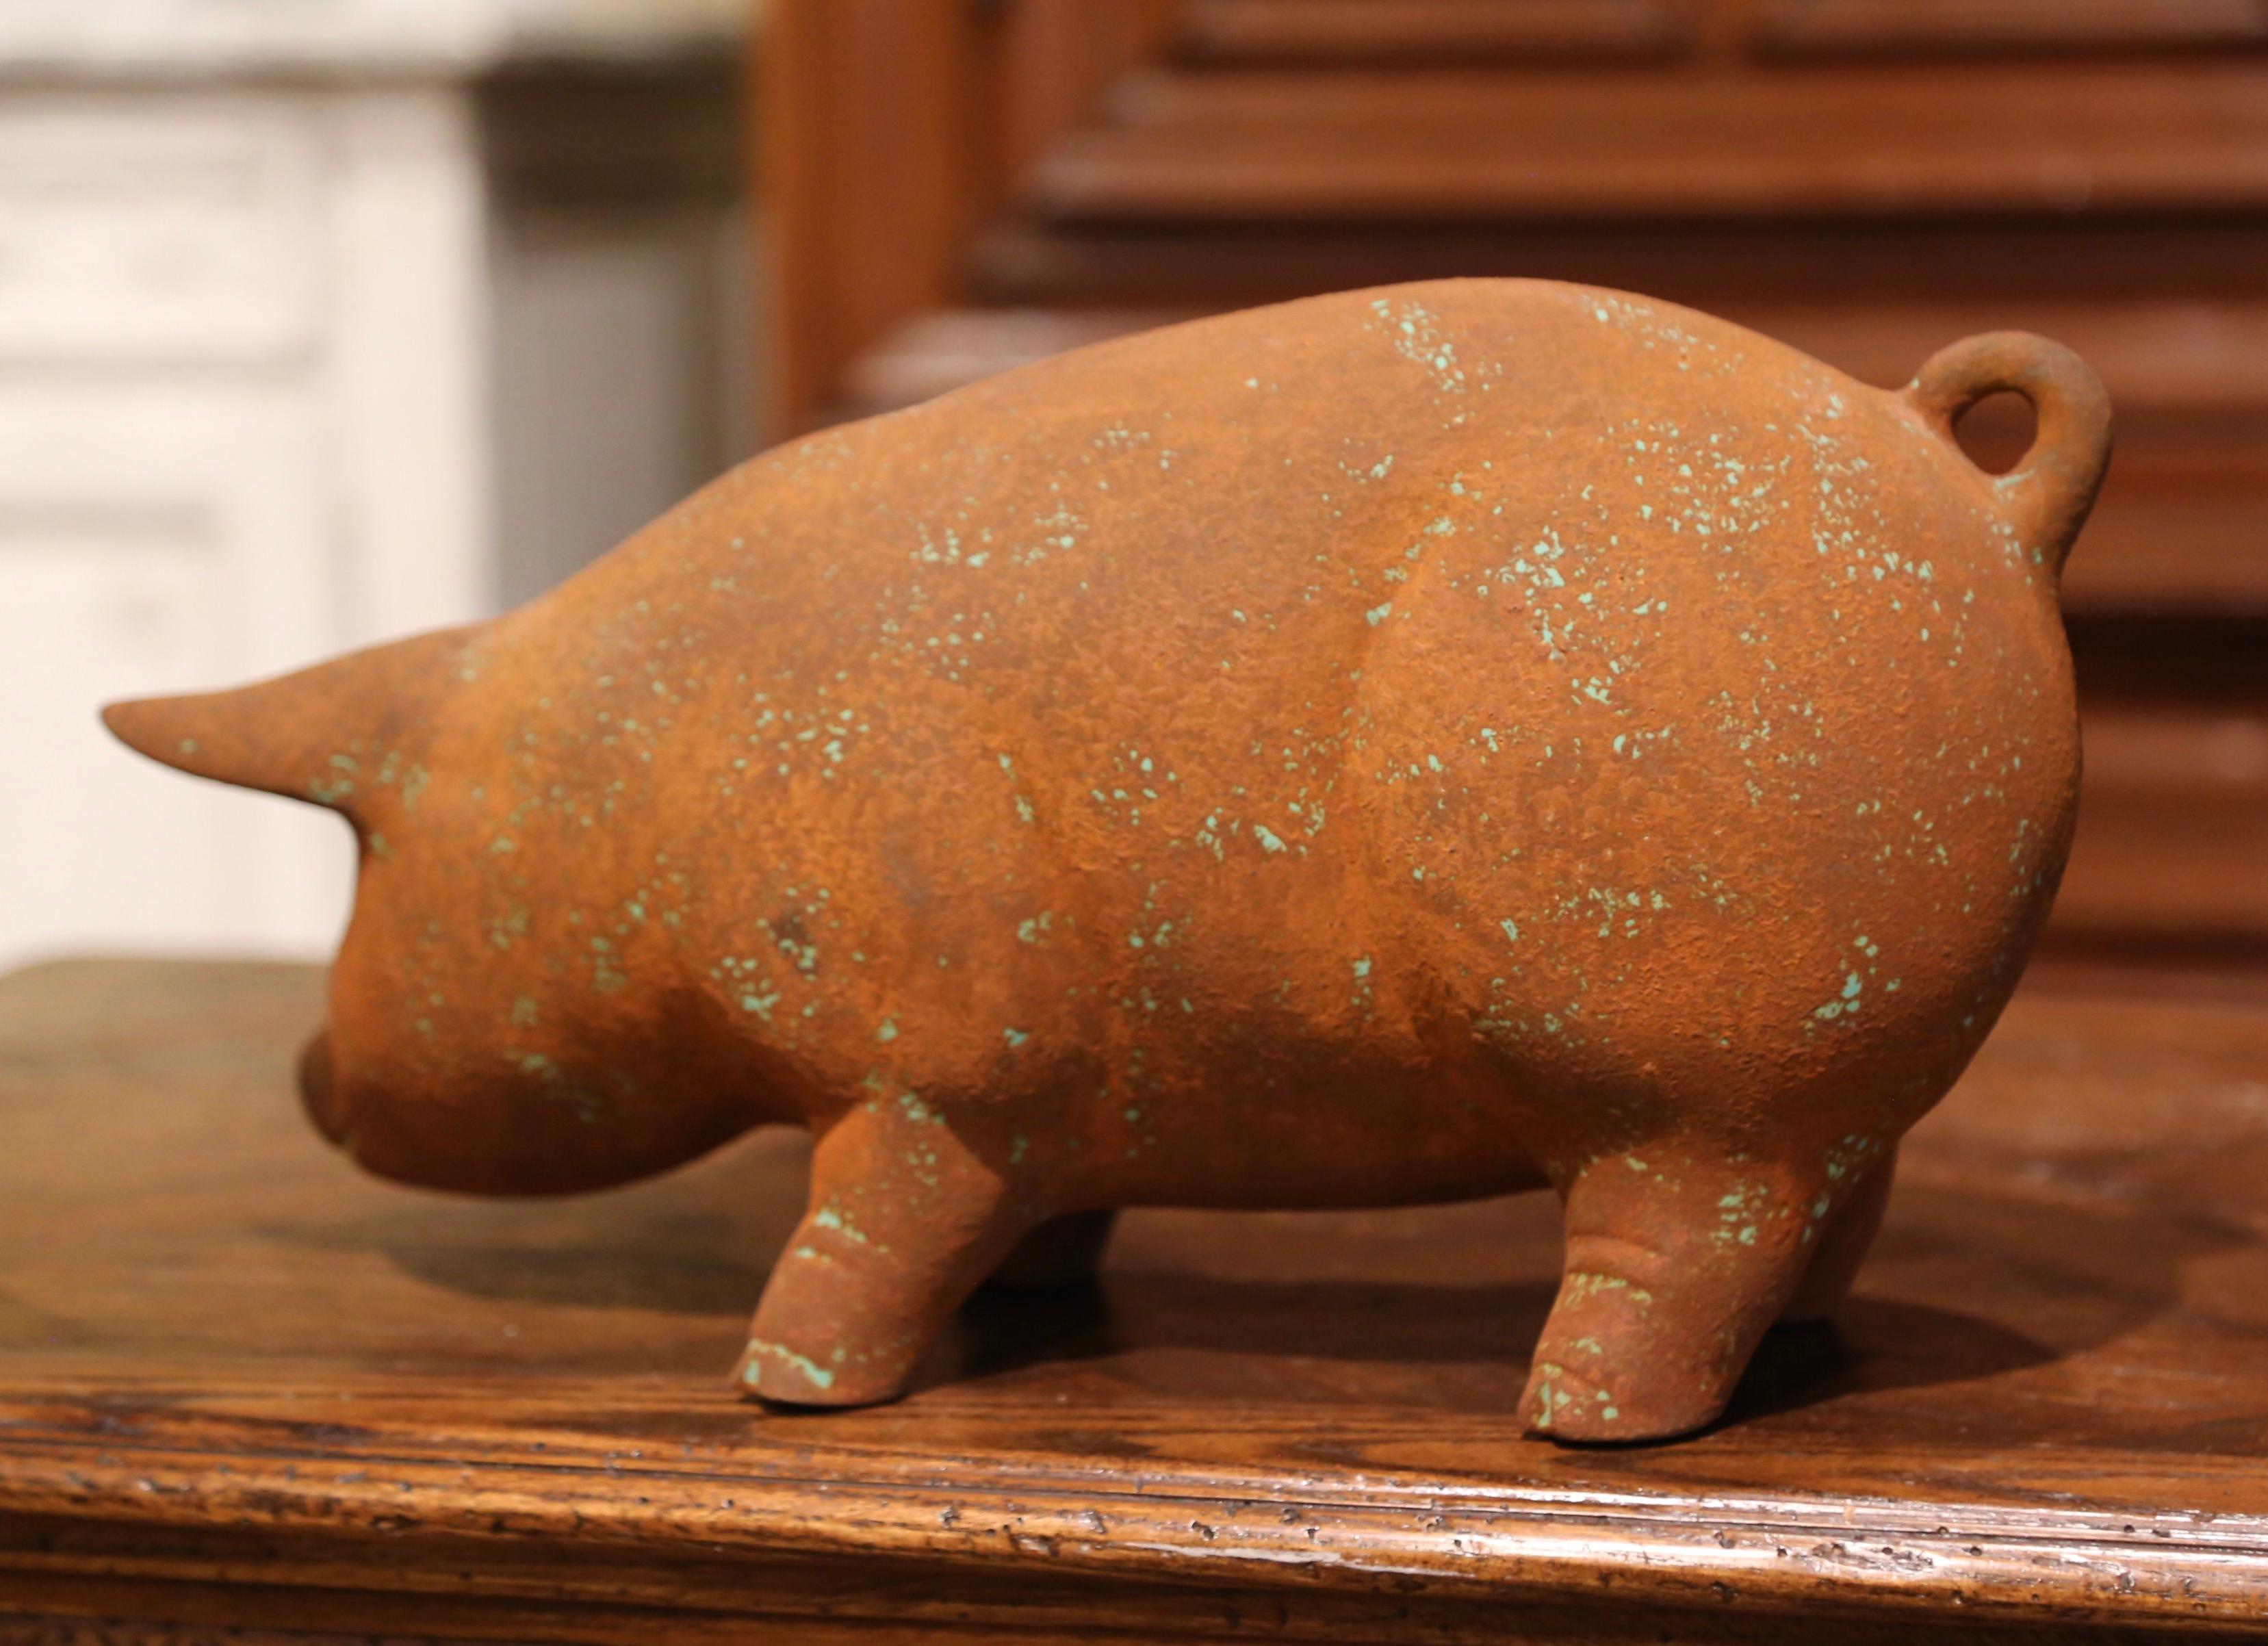 Contemporary 20th Century French Patinated Terracotta Garden Pig Sculpture